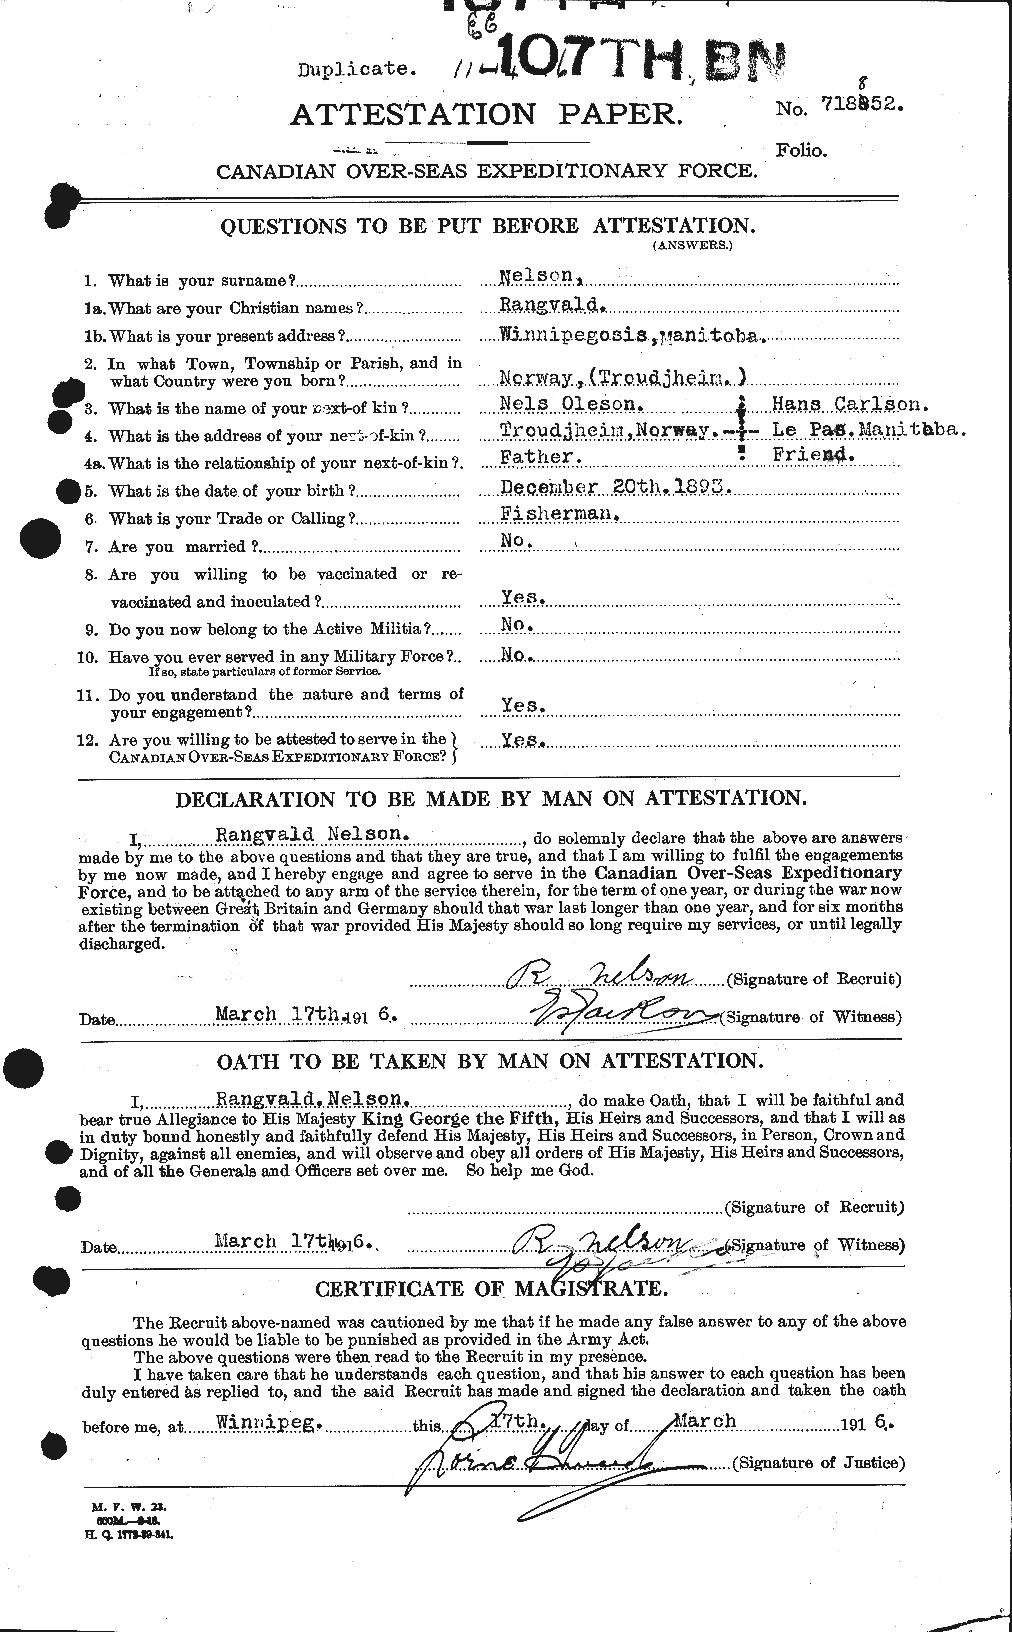 Personnel Records of the First World War - CEF 545404a